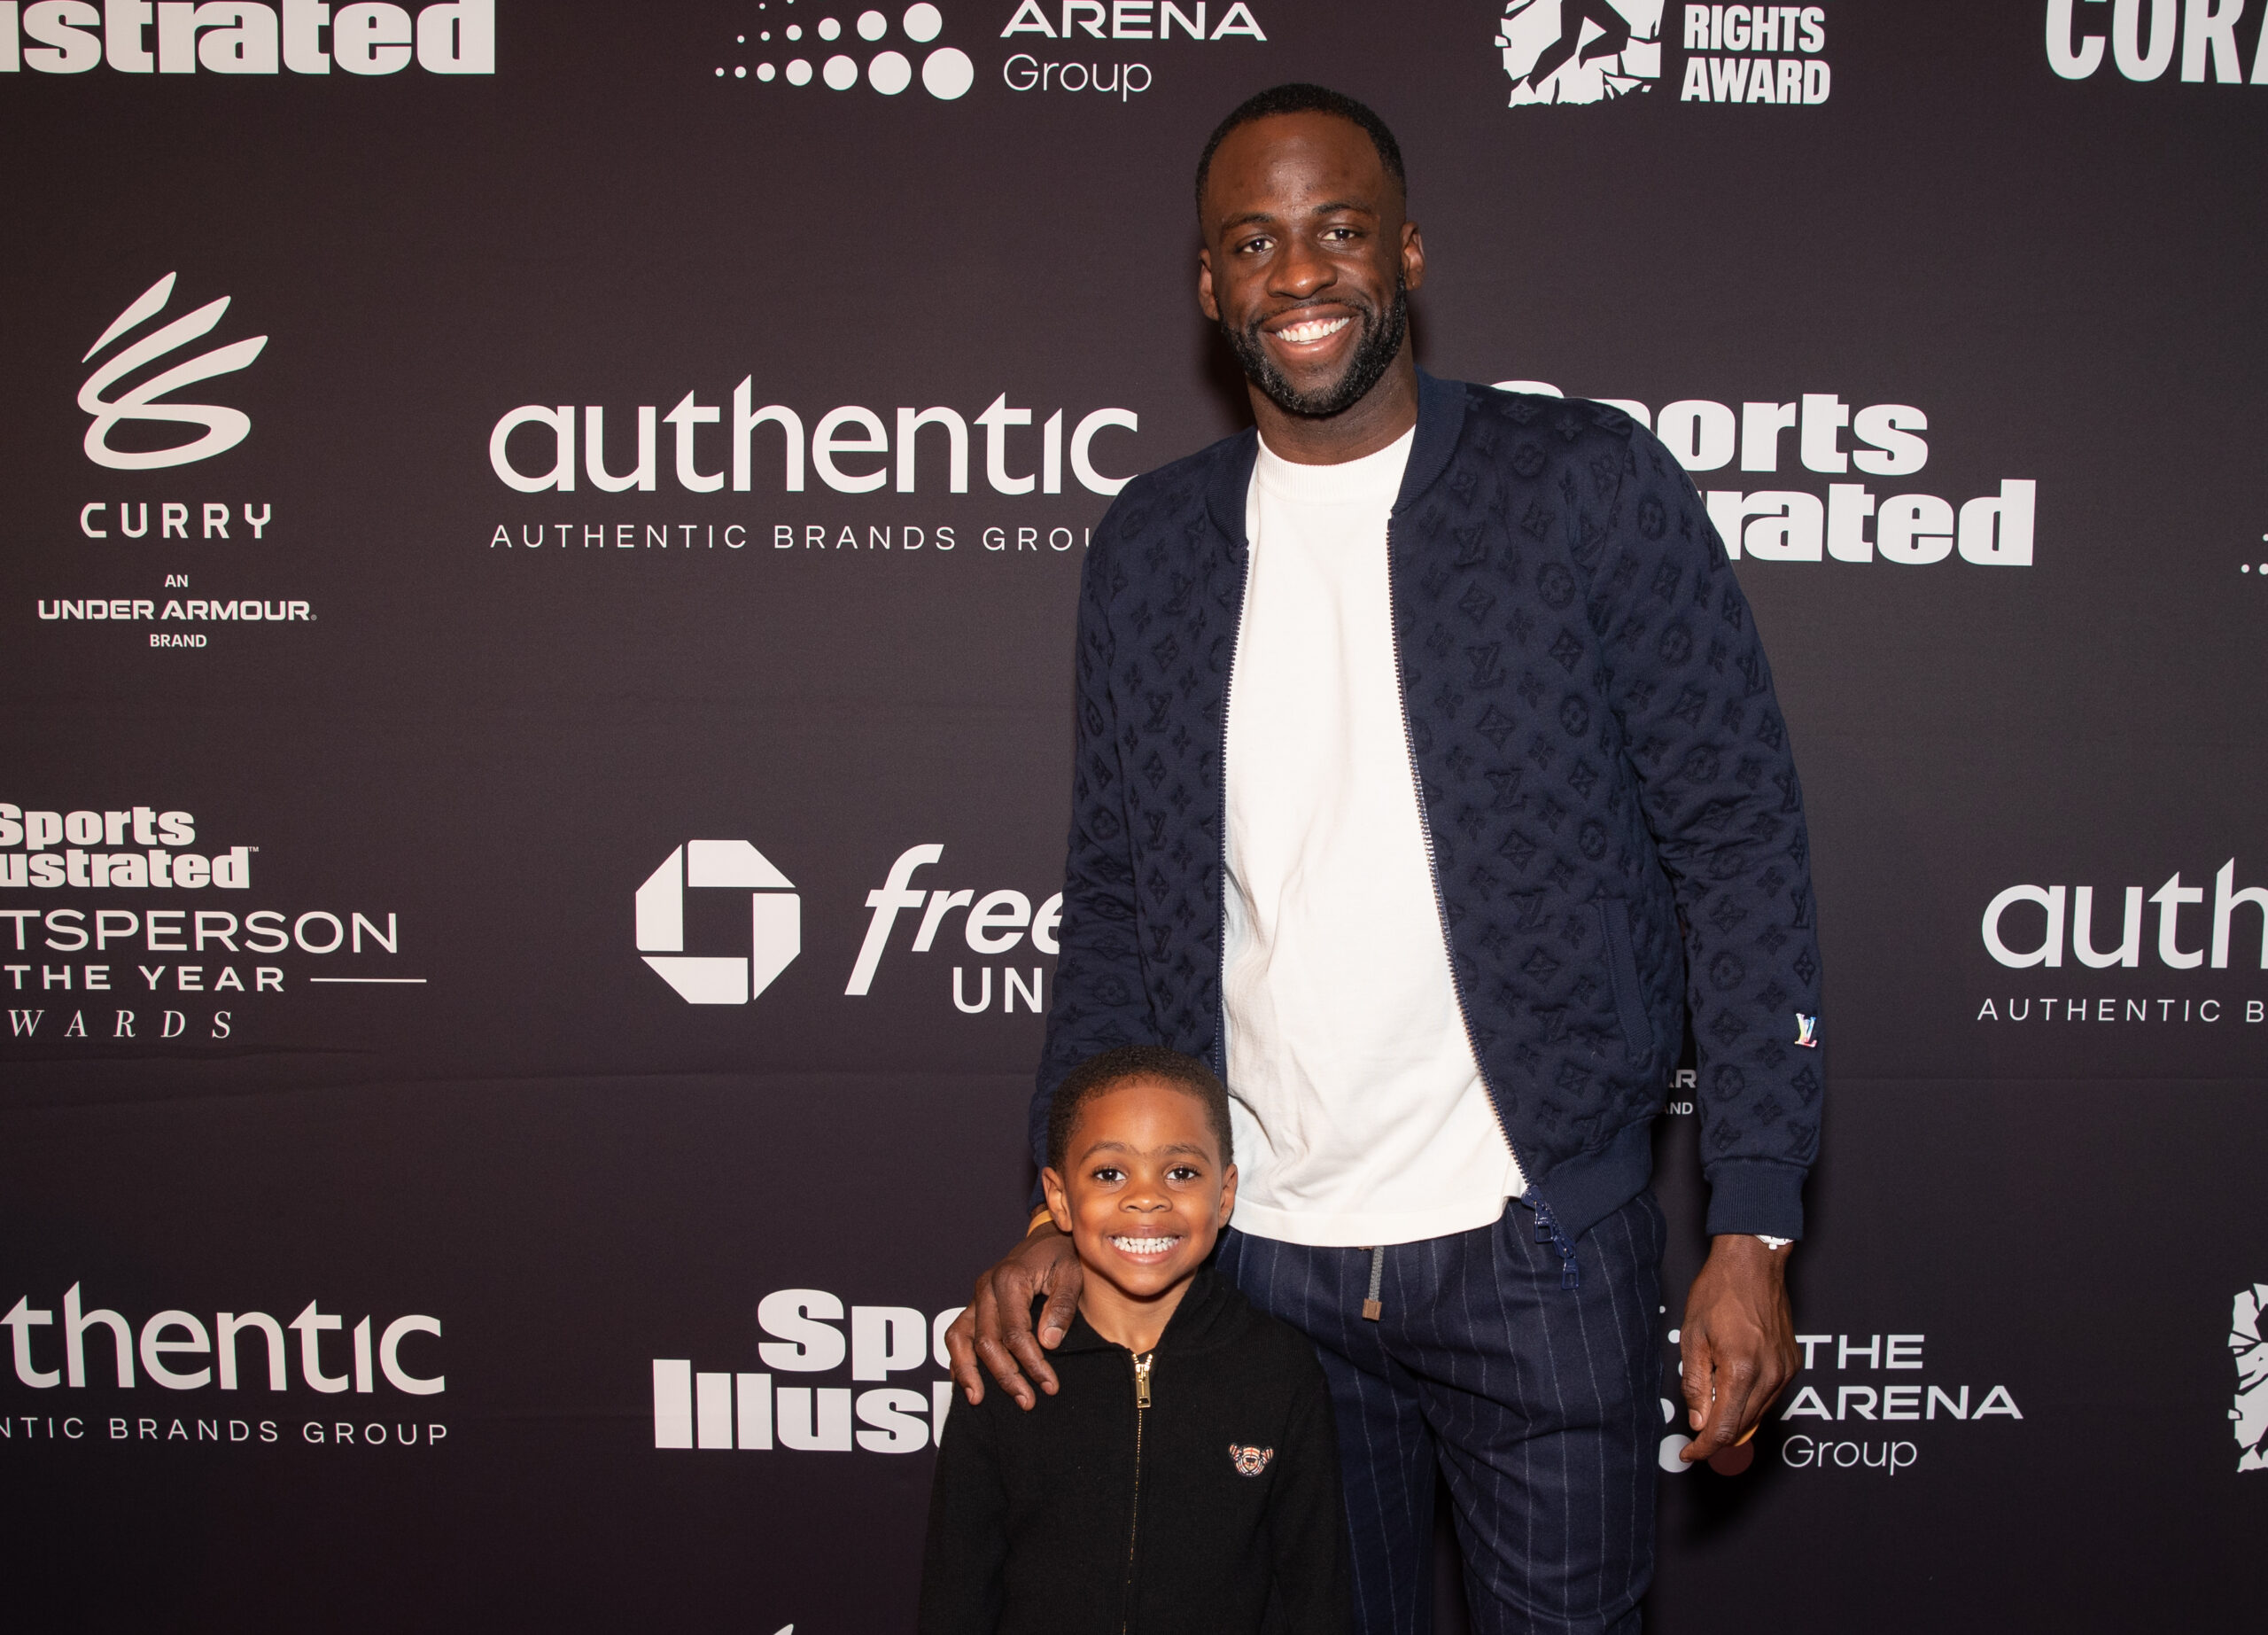 What Advice Does Draymond Green Have for Bay Area Youth? Professional Athletes Share Tips for the Next Generation